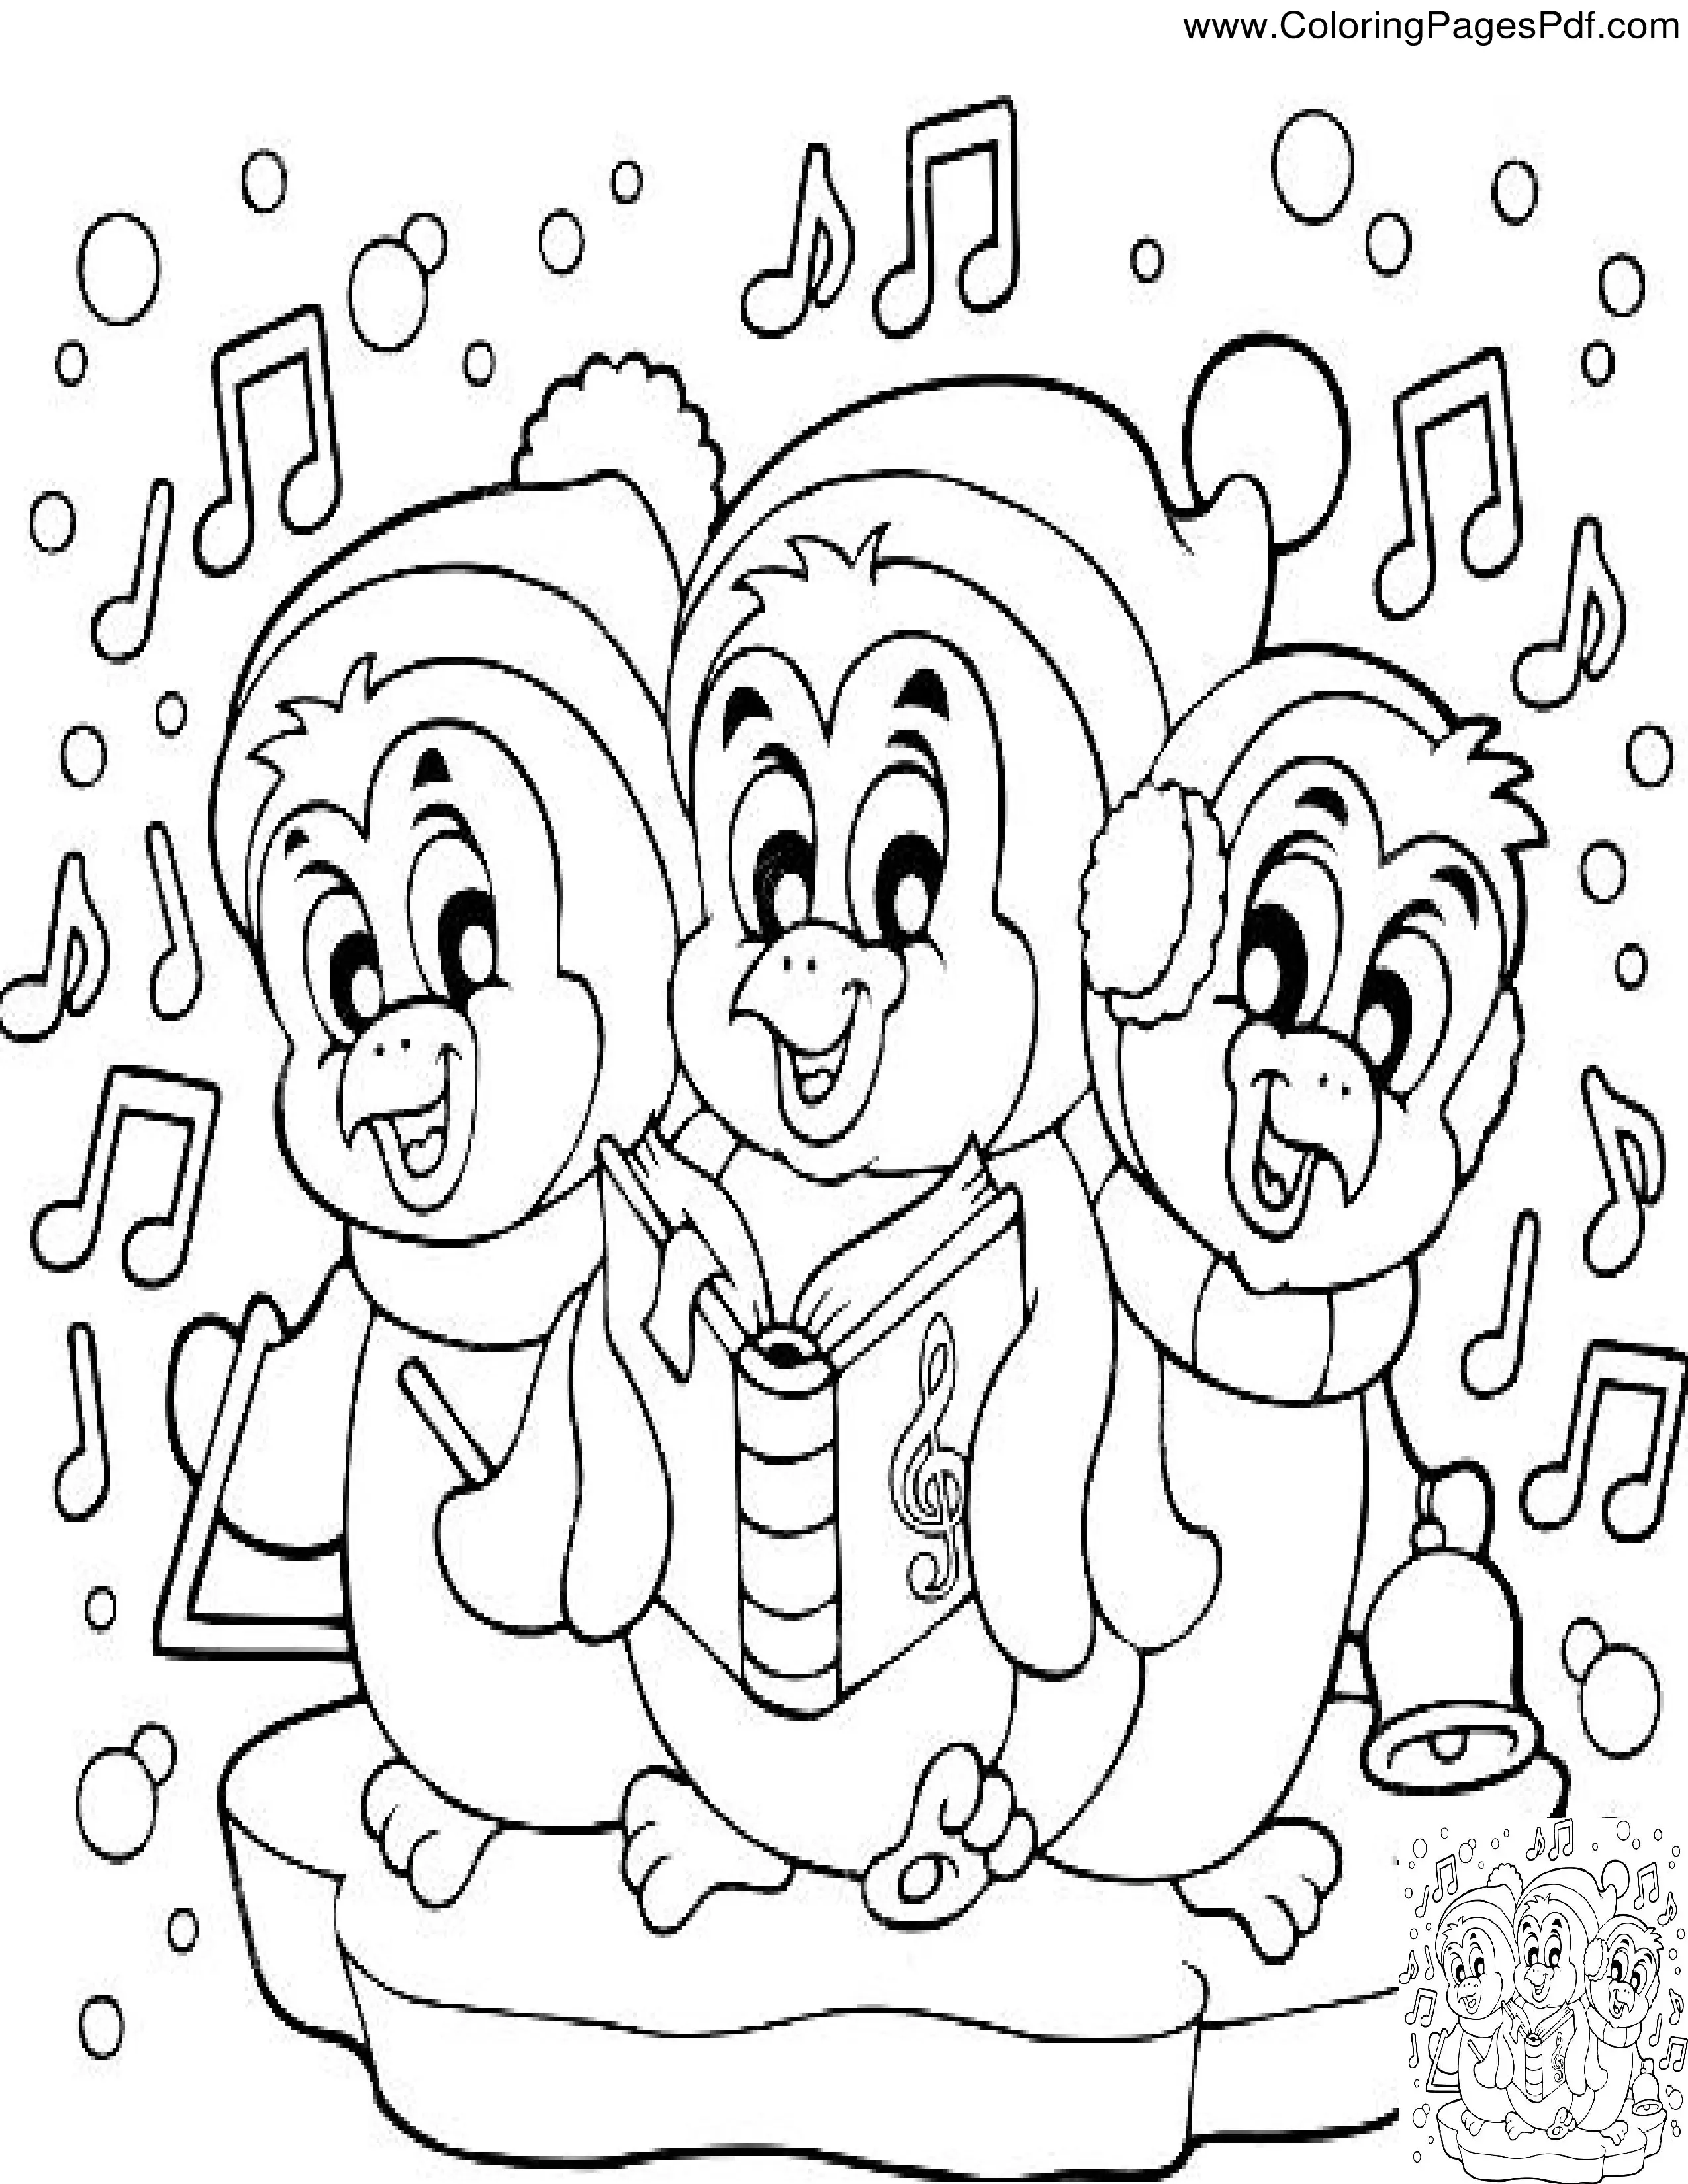 Easy penguin coloring pages